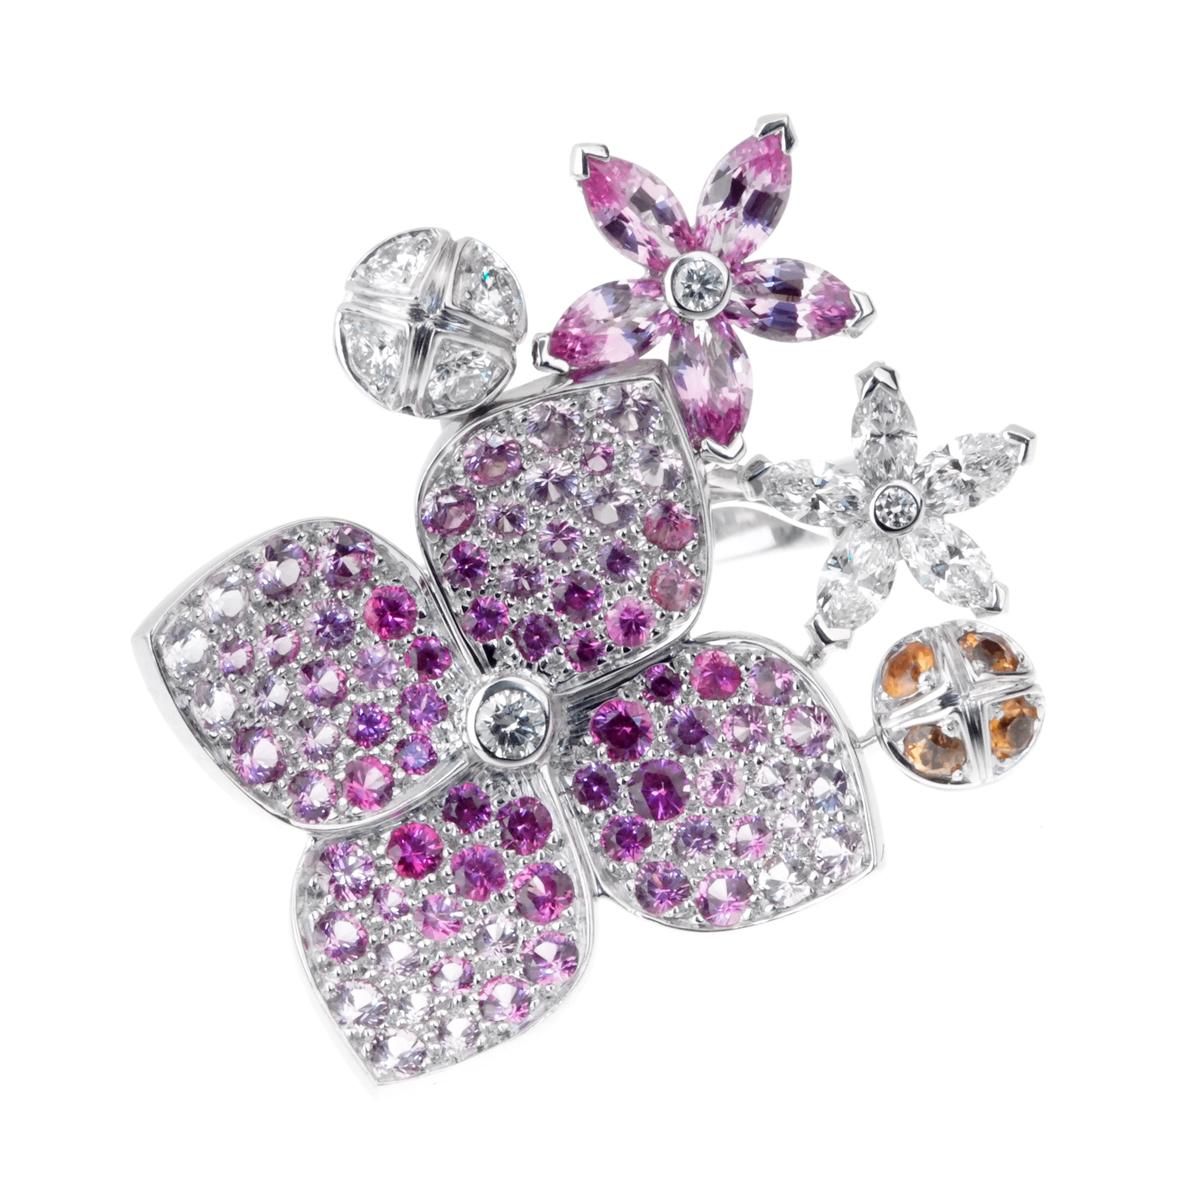 A stunning display of craftsmanship in this fabulous Van Cleef & Arpels diamond ring showcasing graduating colors of pink sapphire illuminated by round brilliant cut diamonds in 18k white gold. A plethora of multi color and multi shaped sapphires